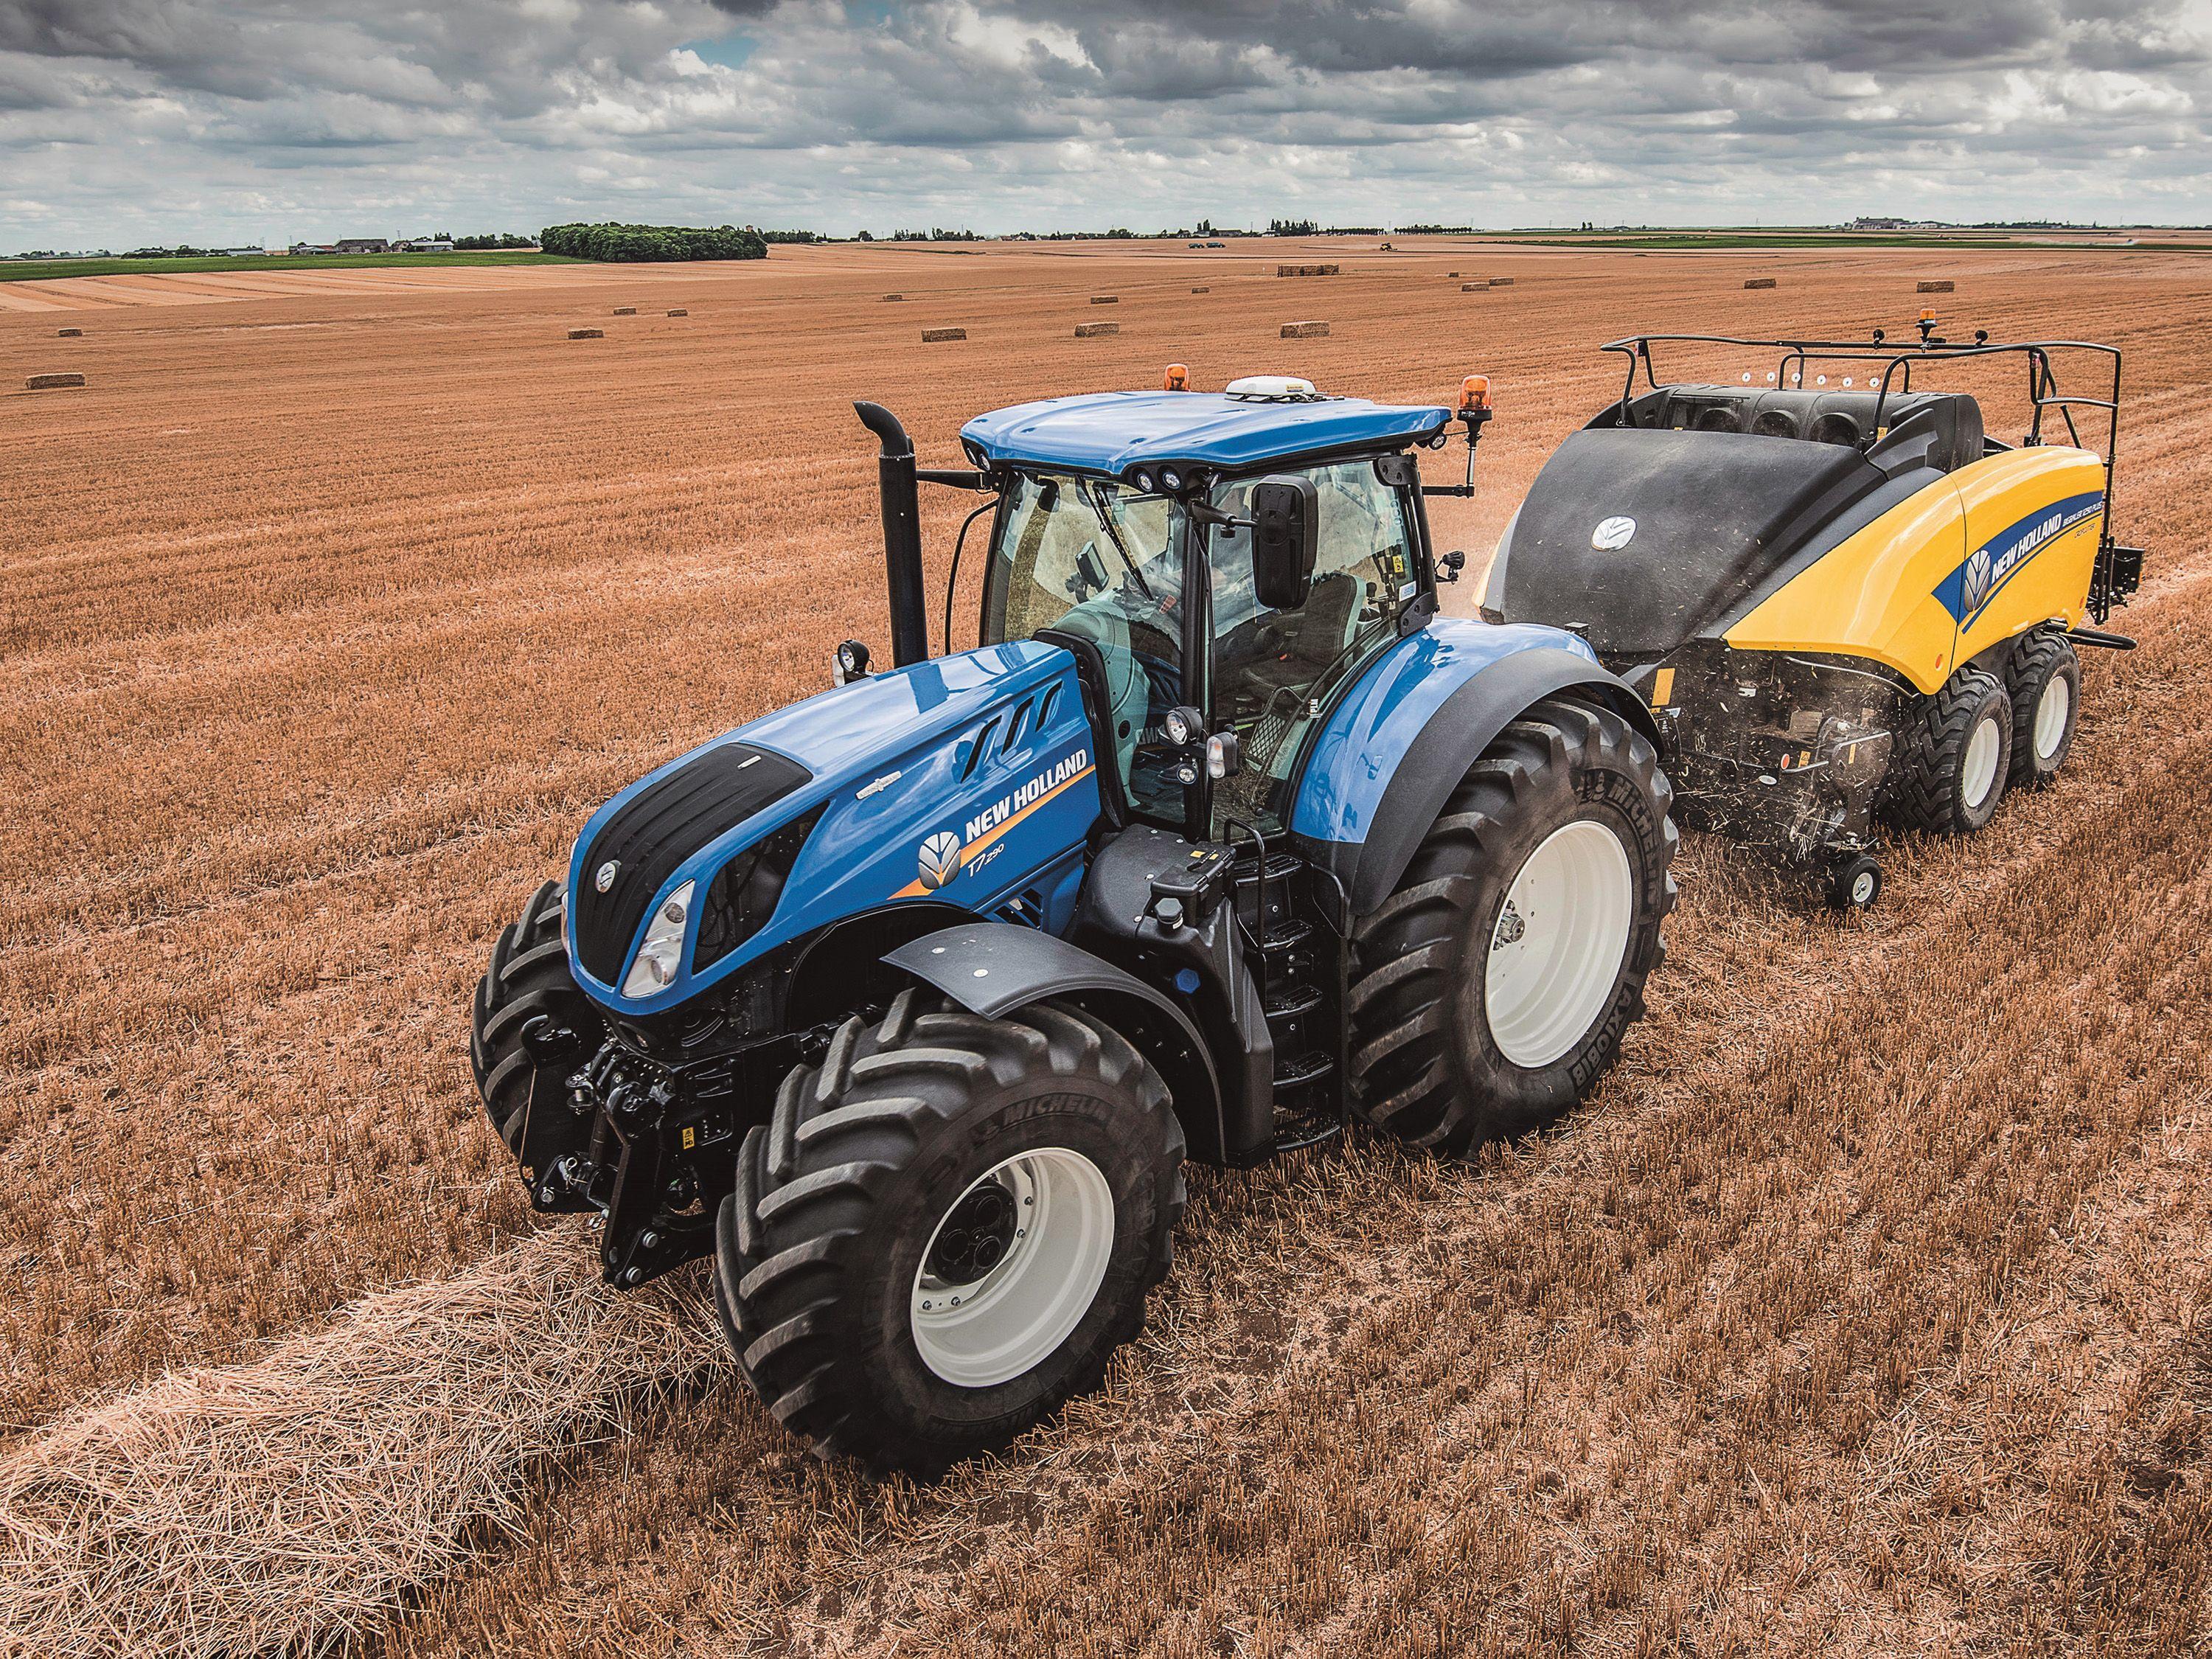 New Holland Tractor Wallpapers Top Free New Holland Tractor